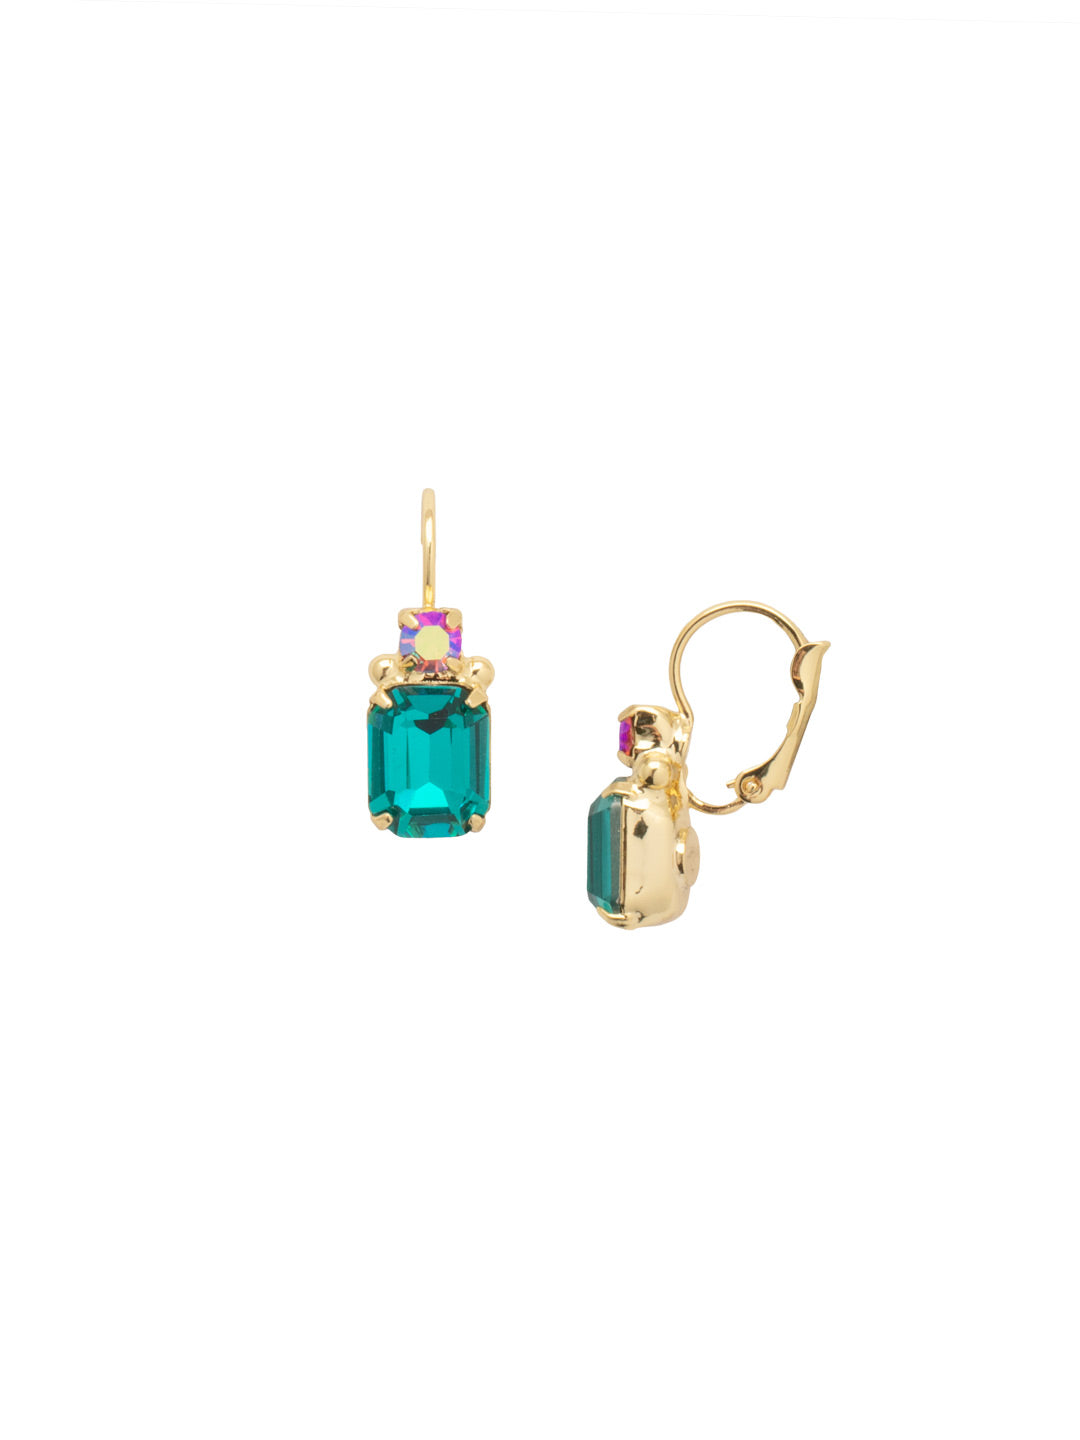 Octavia Studded Dangle Earrings - EEA7BGHBR - <p>The Octavia Studded Dangle Earrings combine simplistic beauty and sparkle, featuring a cushion emerald cut crystal and accented by a small round crystal above. From Sorrelli's Happy Birthday Redux collection in our Bright Gold-tone finish.</p>